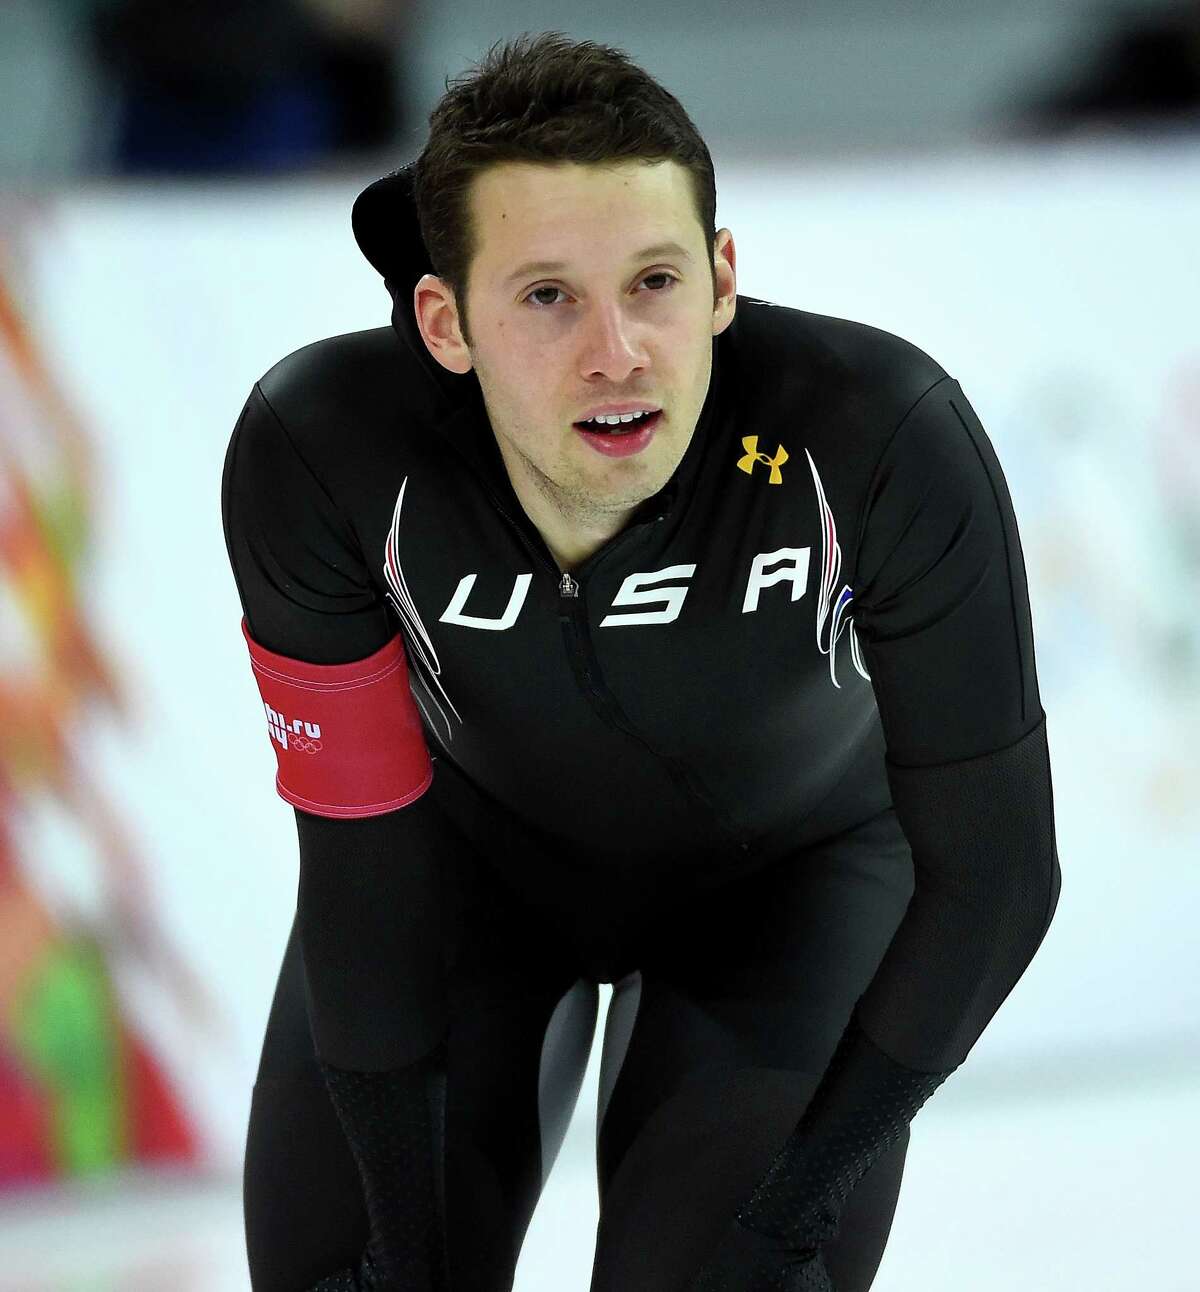 In his first Olympic speed-skating competition, Jonathan Garcia finished 28th in the 1,000 meters at Sochi in 2013.